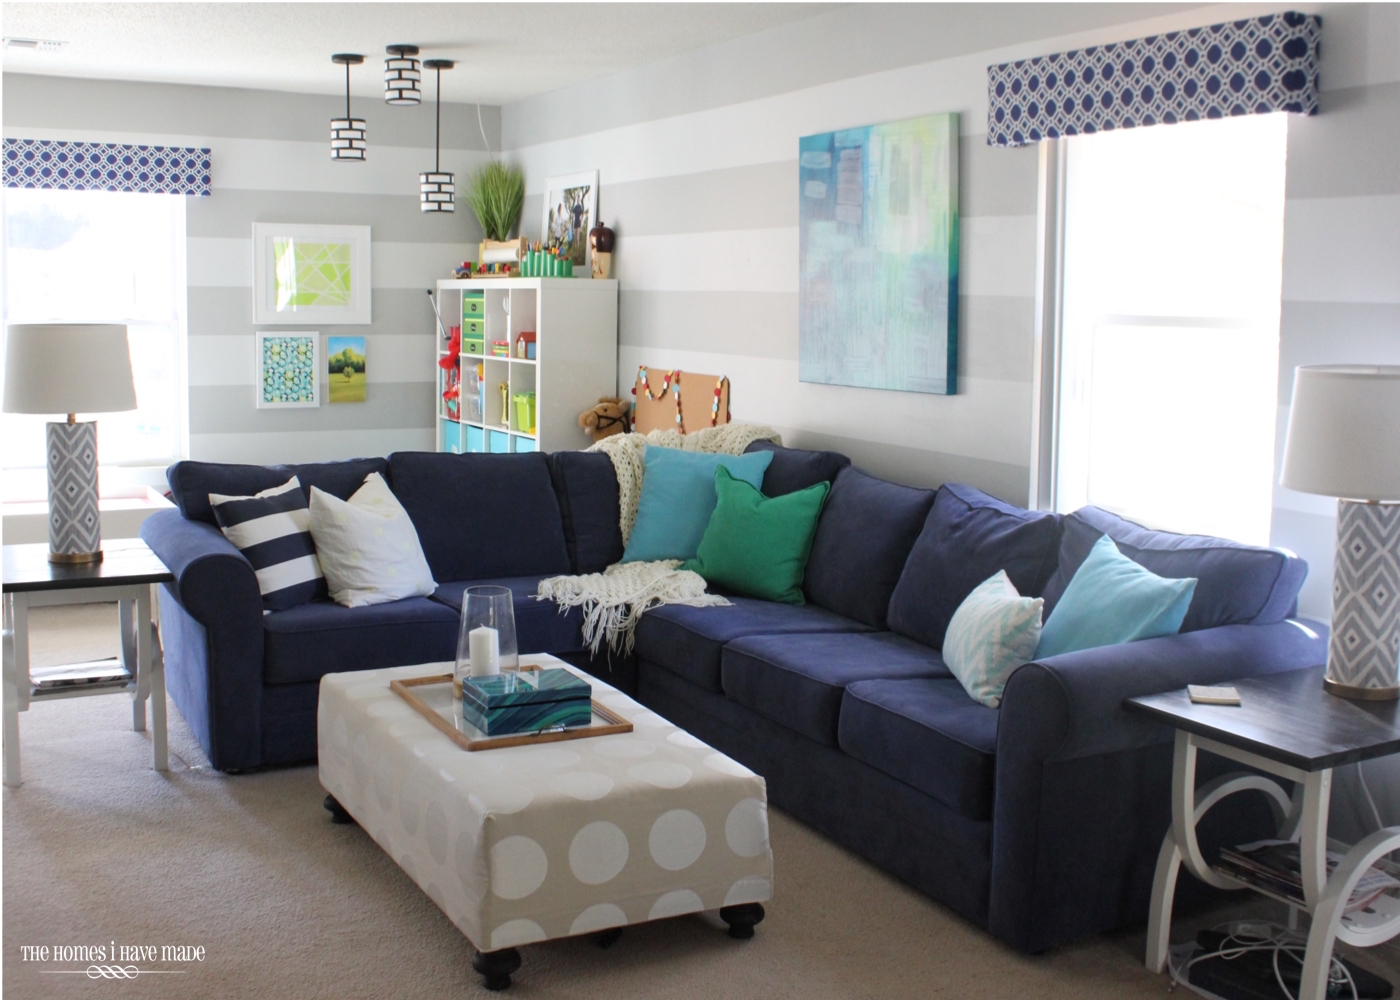 Little Updates in the Family Room | The Homes I Have Made